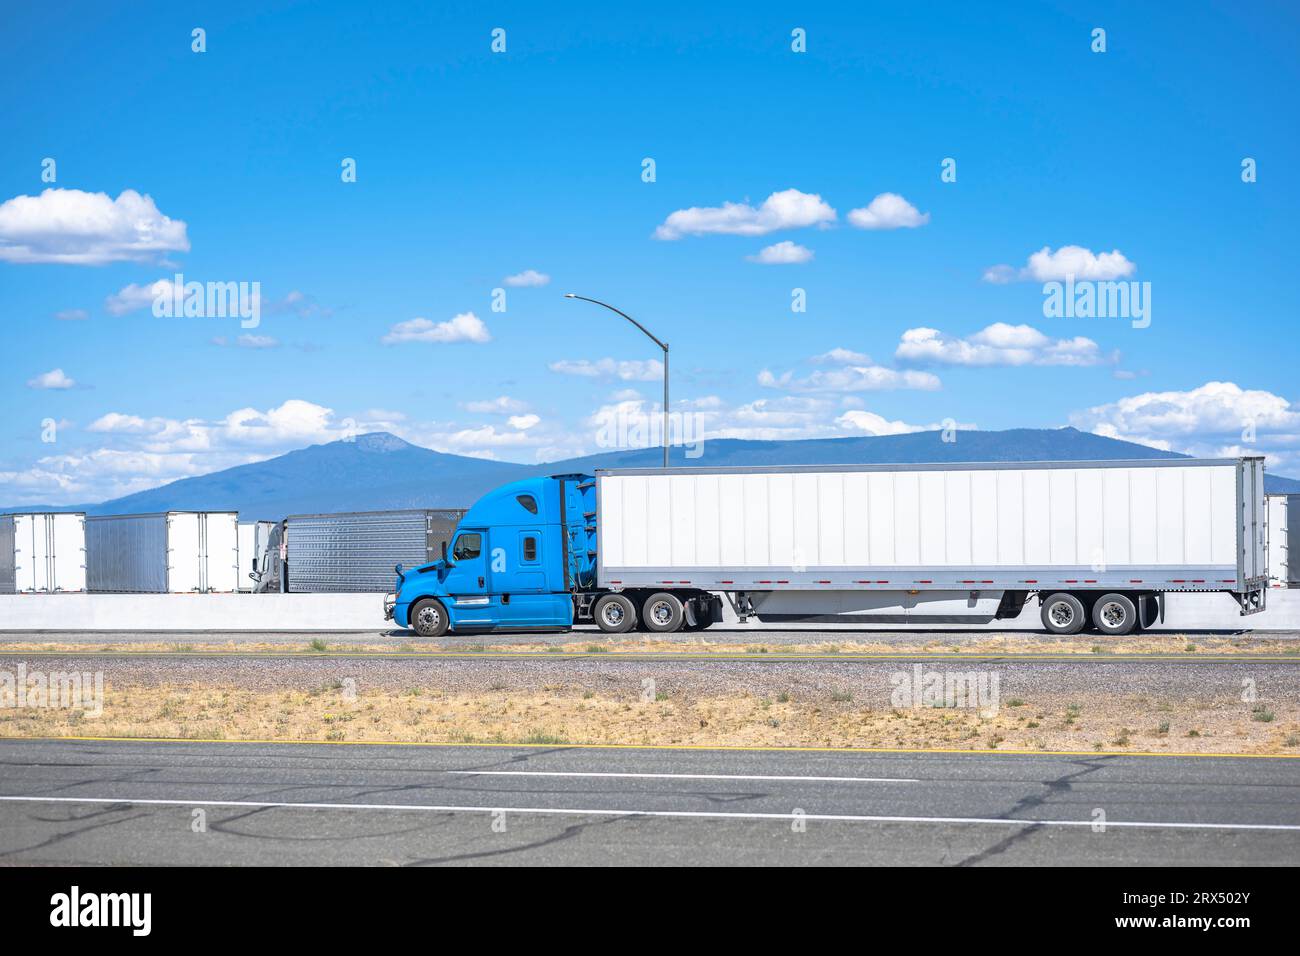 Industrial grade loaded long hauler carrier blue big rig semi truck tractor transporting commercial cargo in dry van semi trailer running on the highw Stock Photo